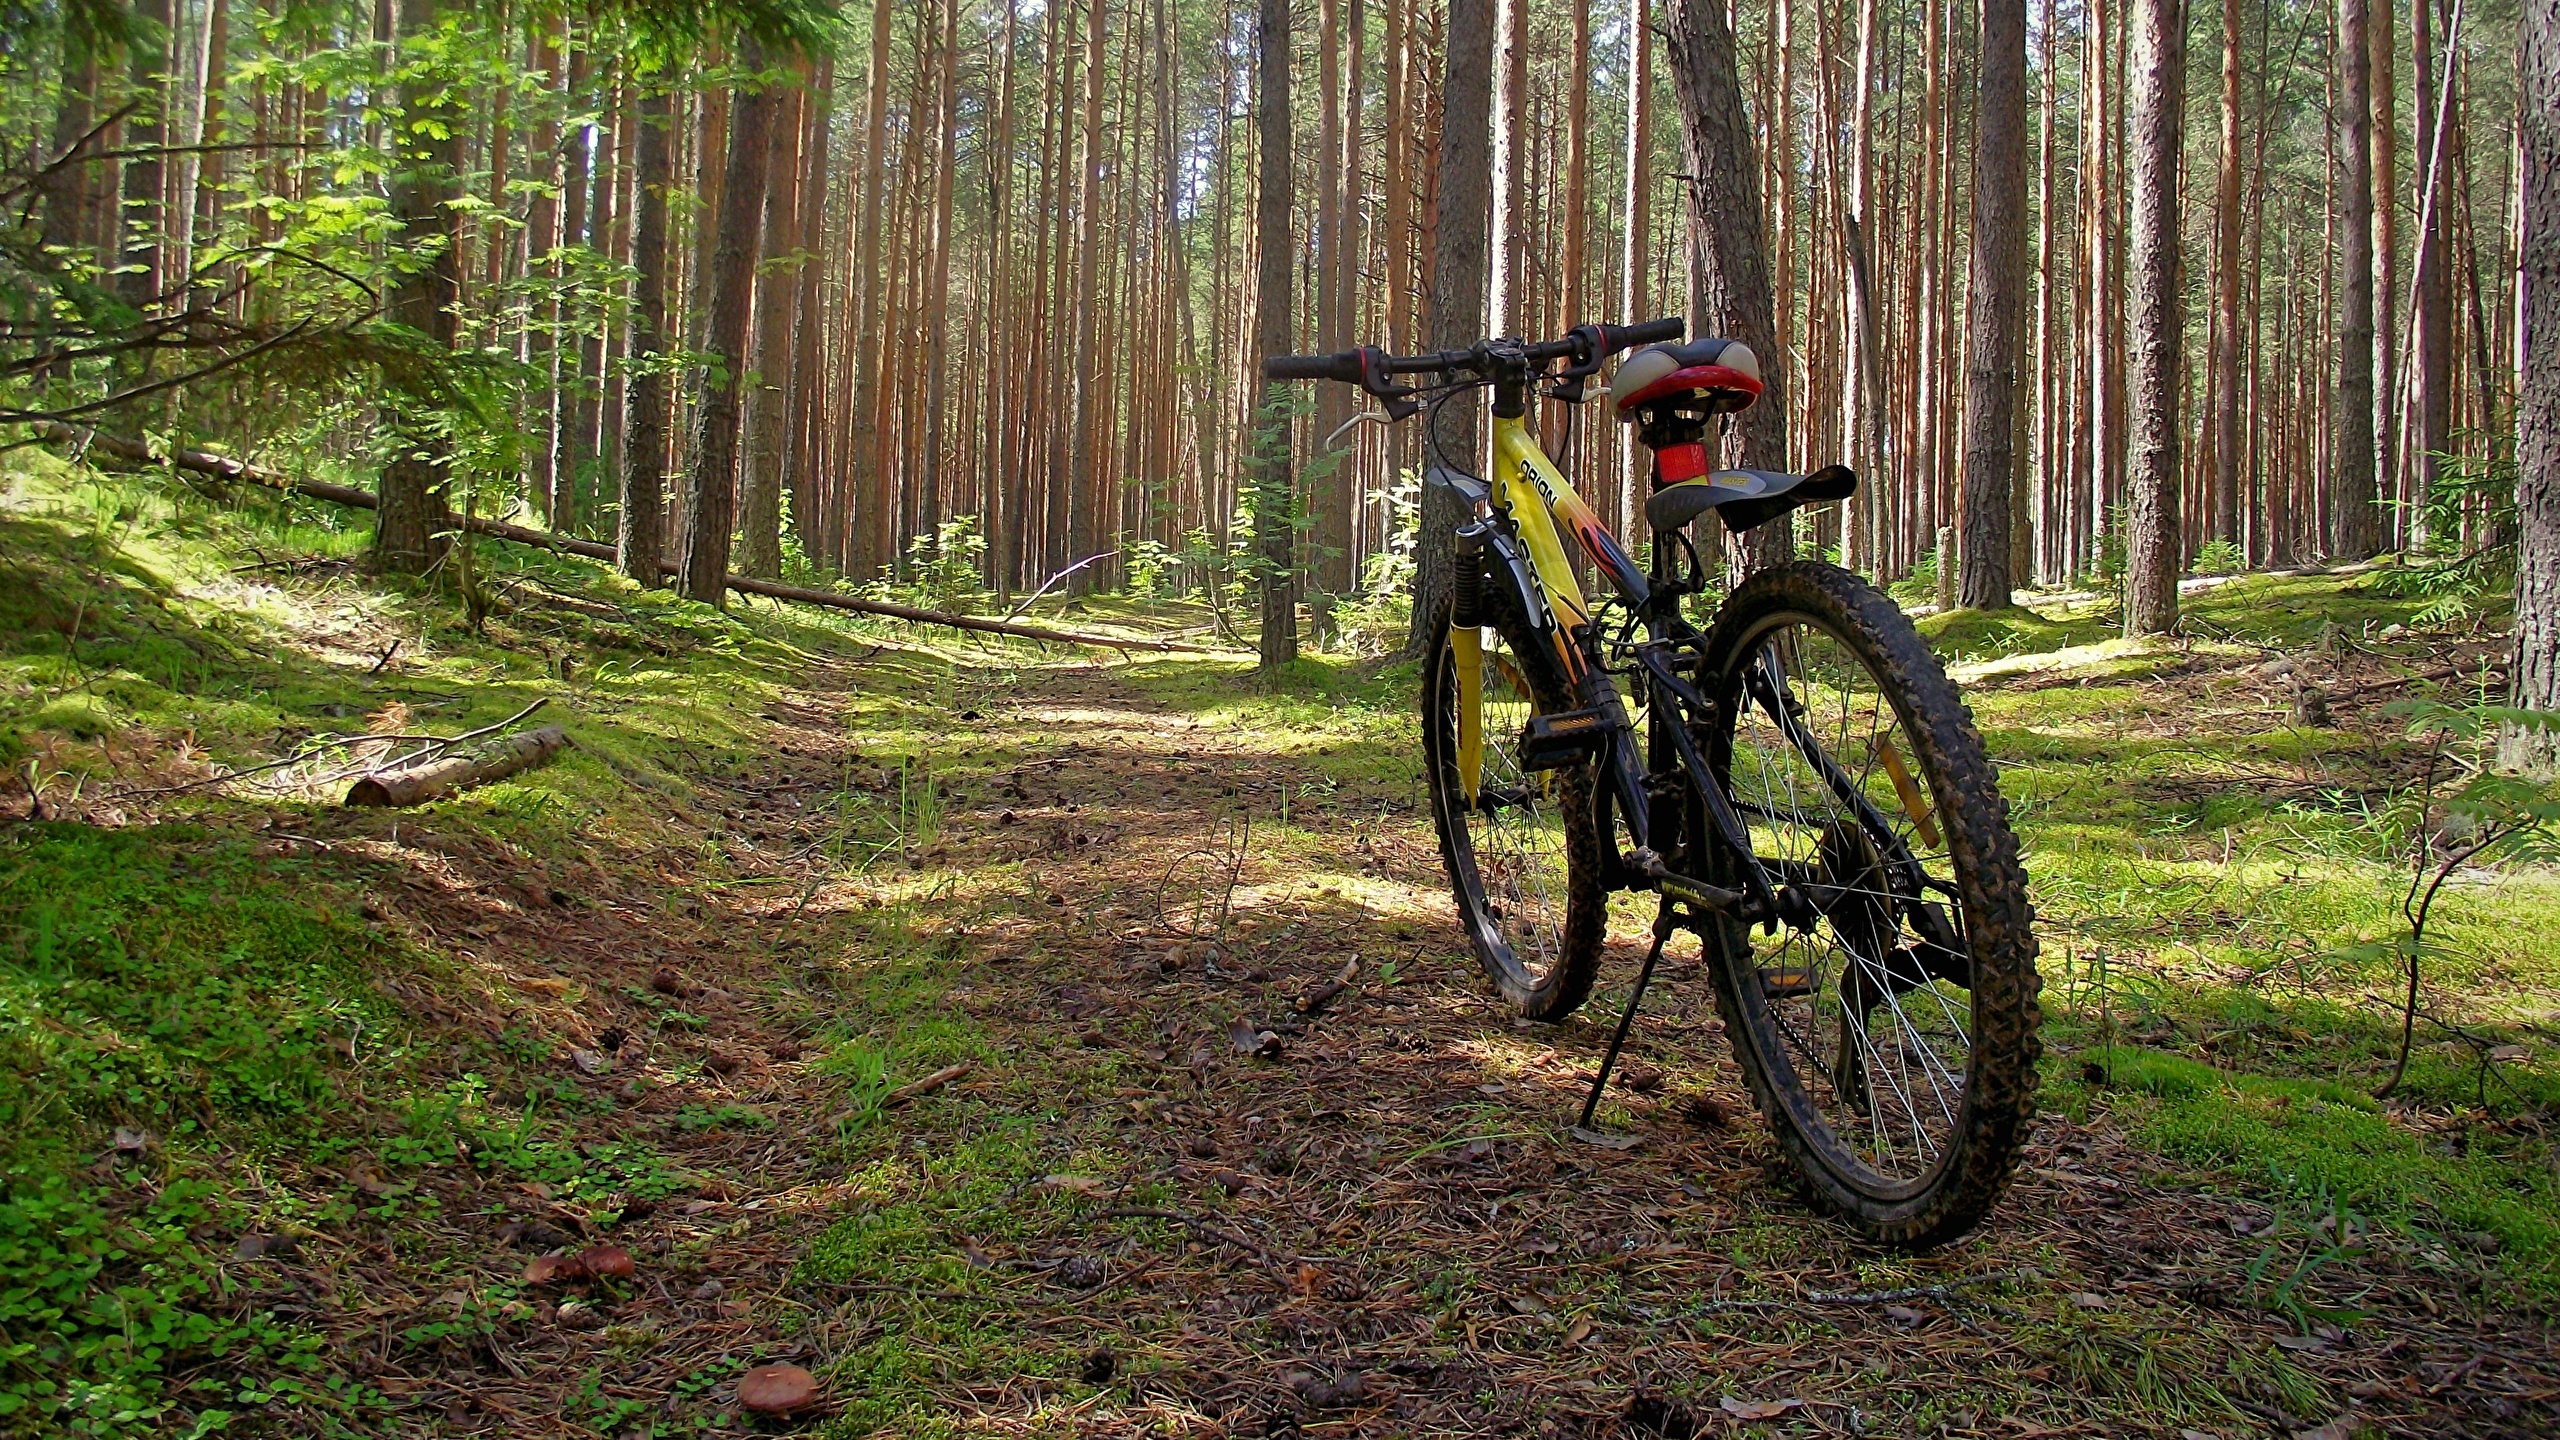 Forests_Bicycle_565602_2560x1440.jpg